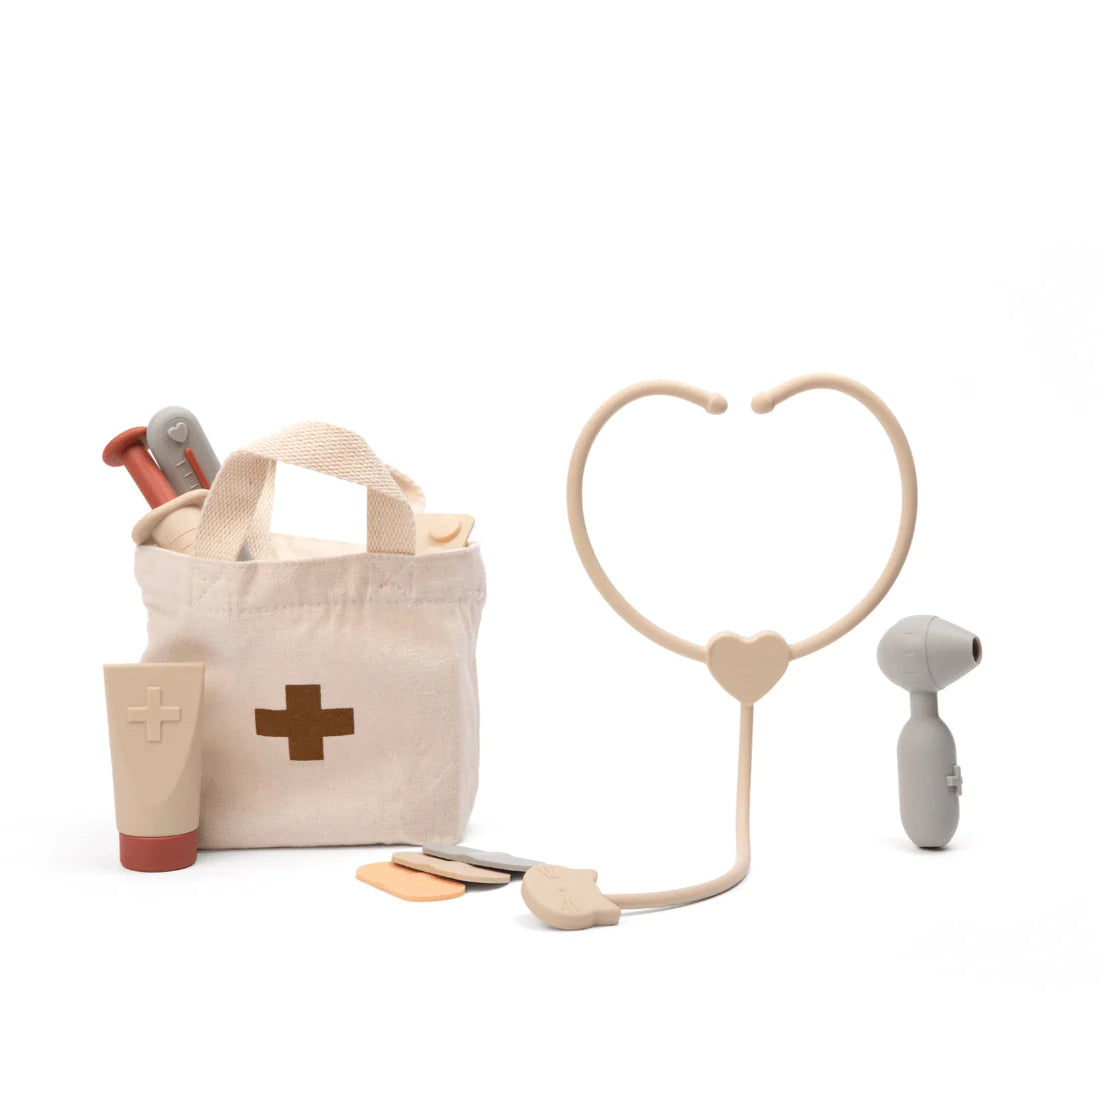 Silicone Doctor Set